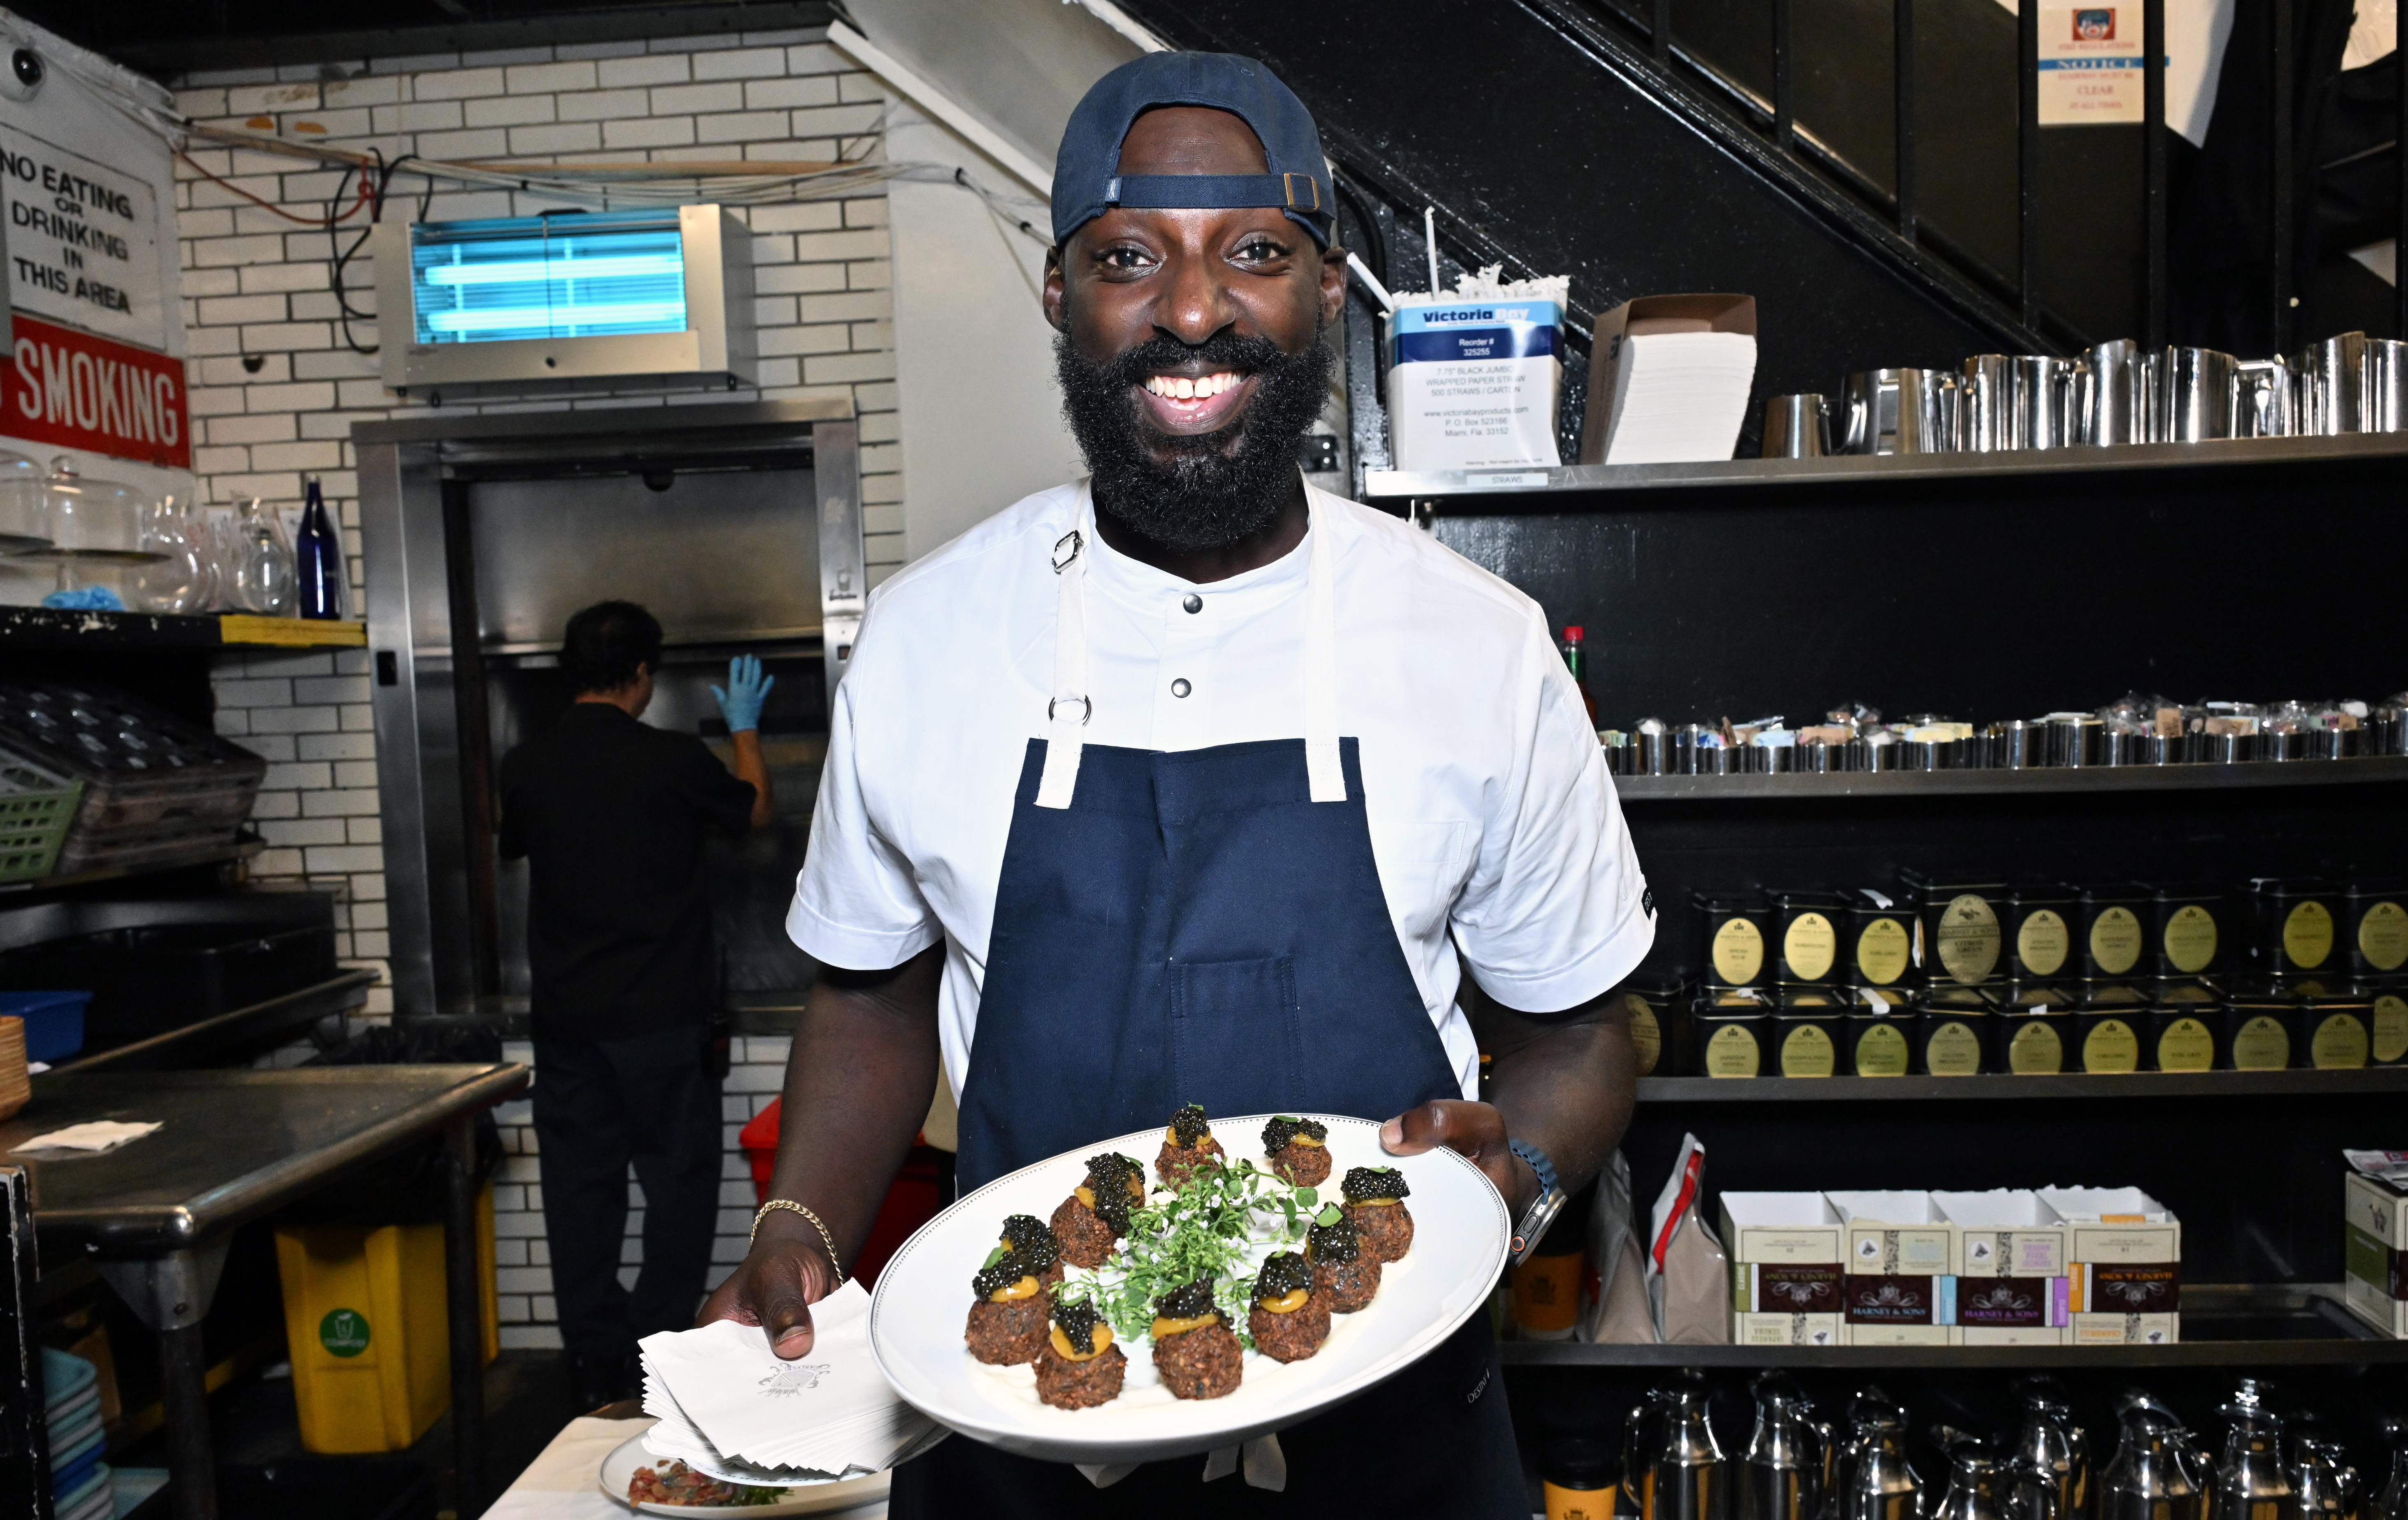 Top Chef finalist Eric Adjepong will host Food Network's forthcoming show Wildcard Kitchen